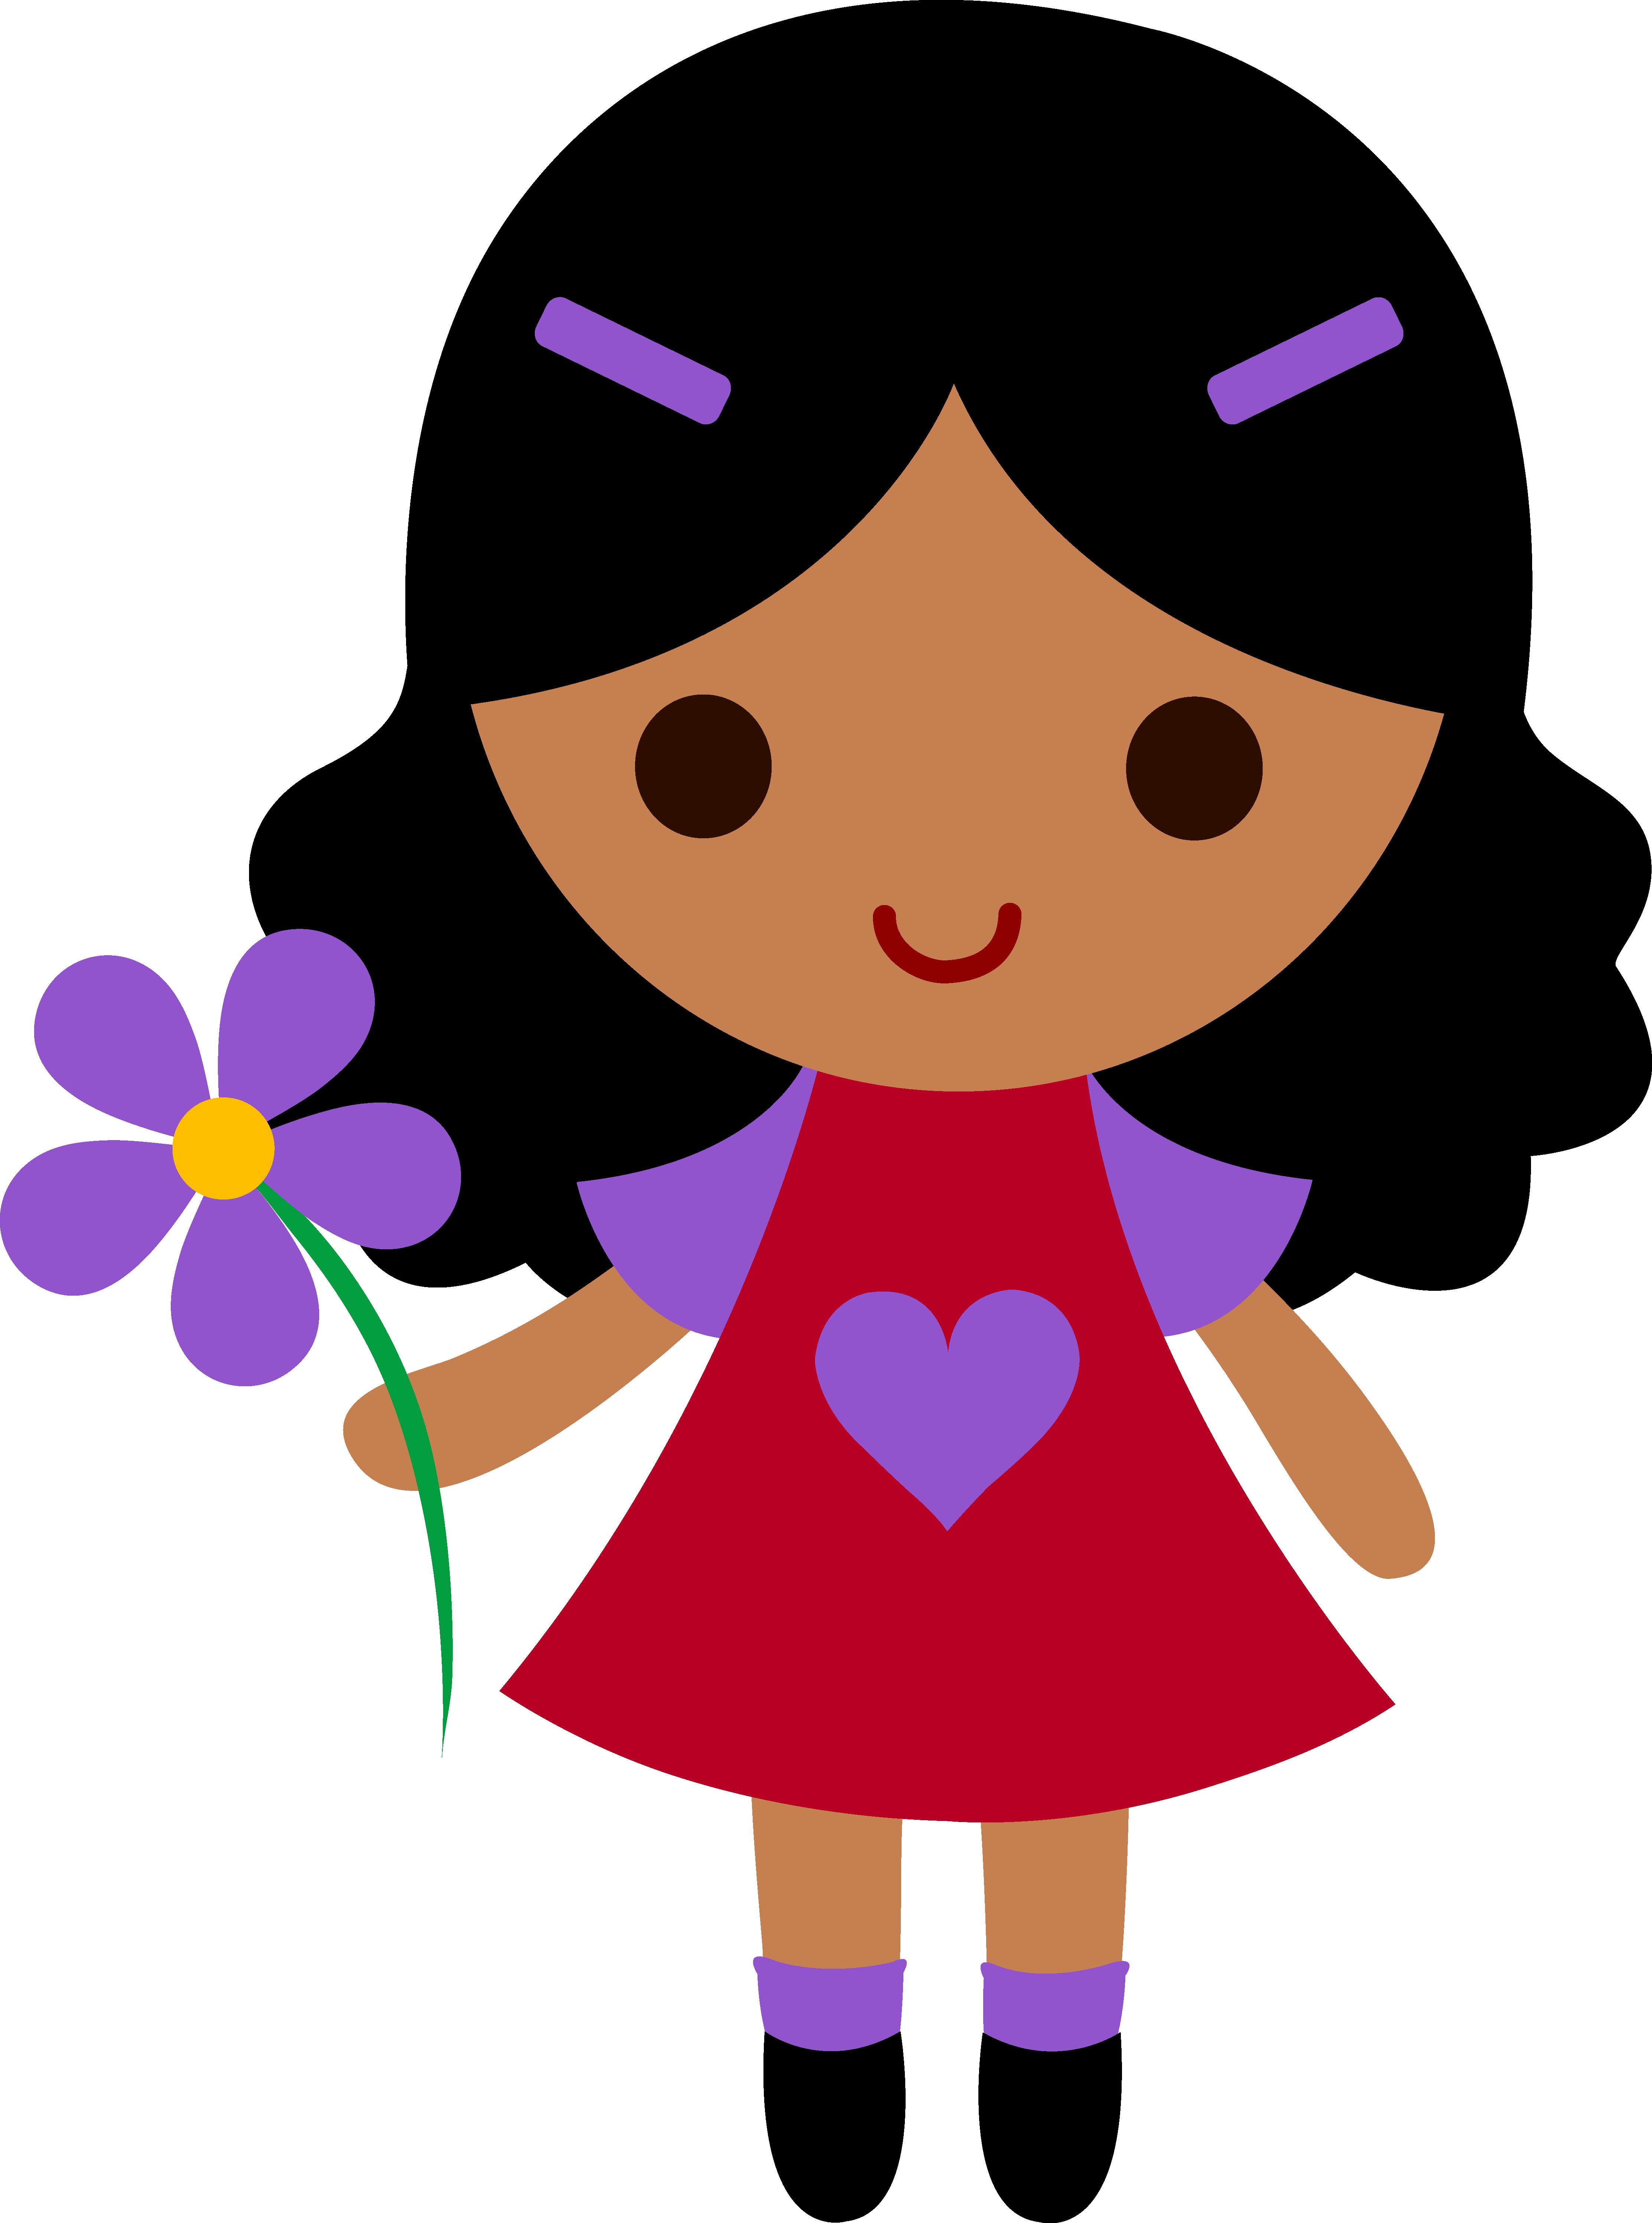 In A Girl Holding The Flower Clipart.